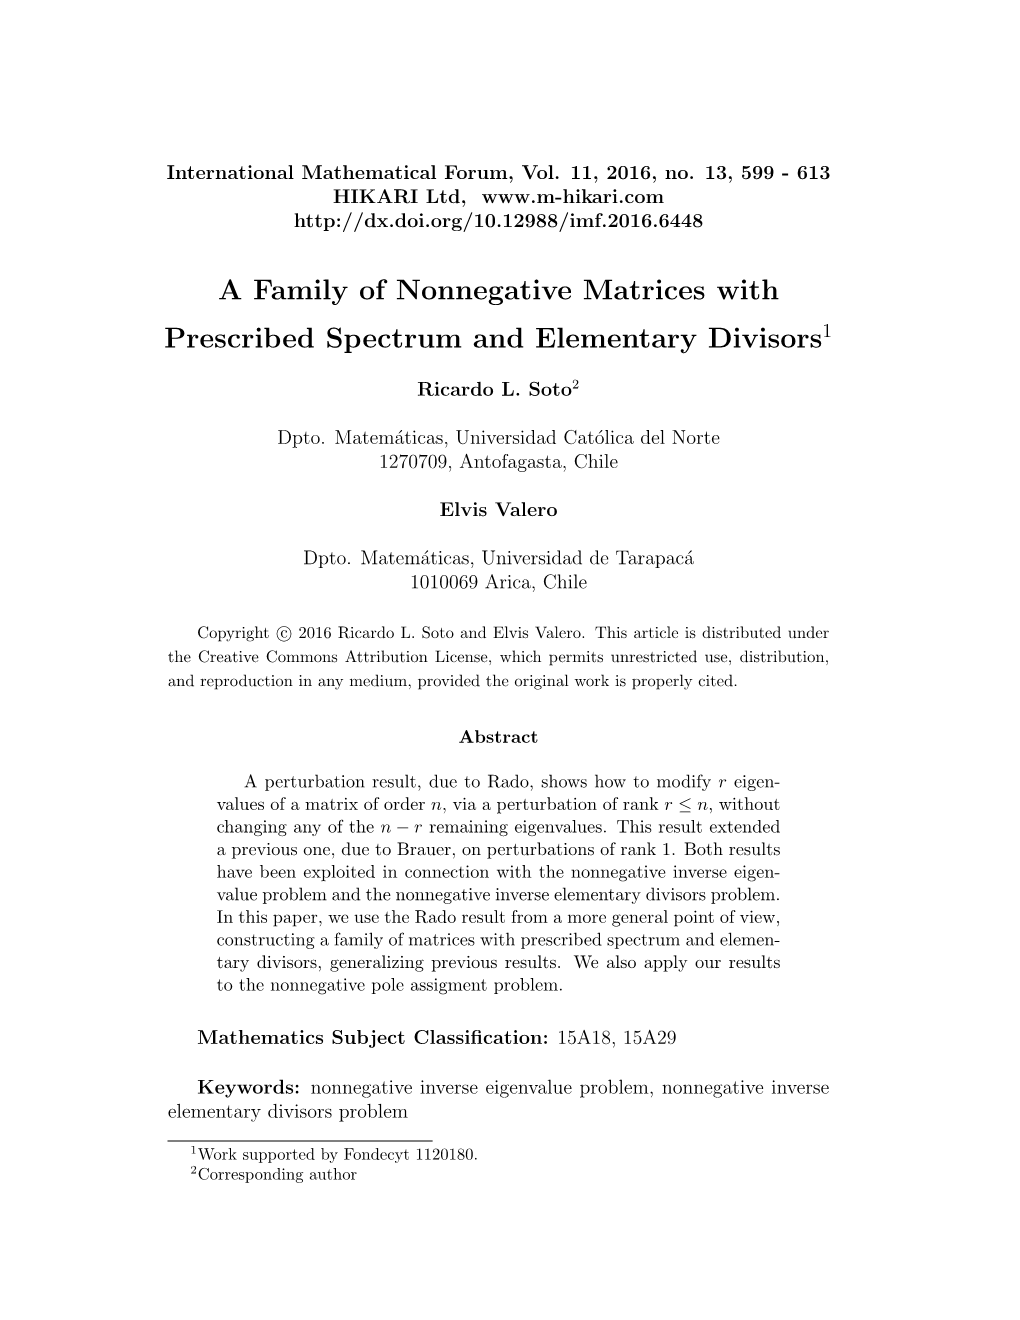 A Family of Nonnegative Matrices with Prescribed Spectrum and Elementary Divisors1